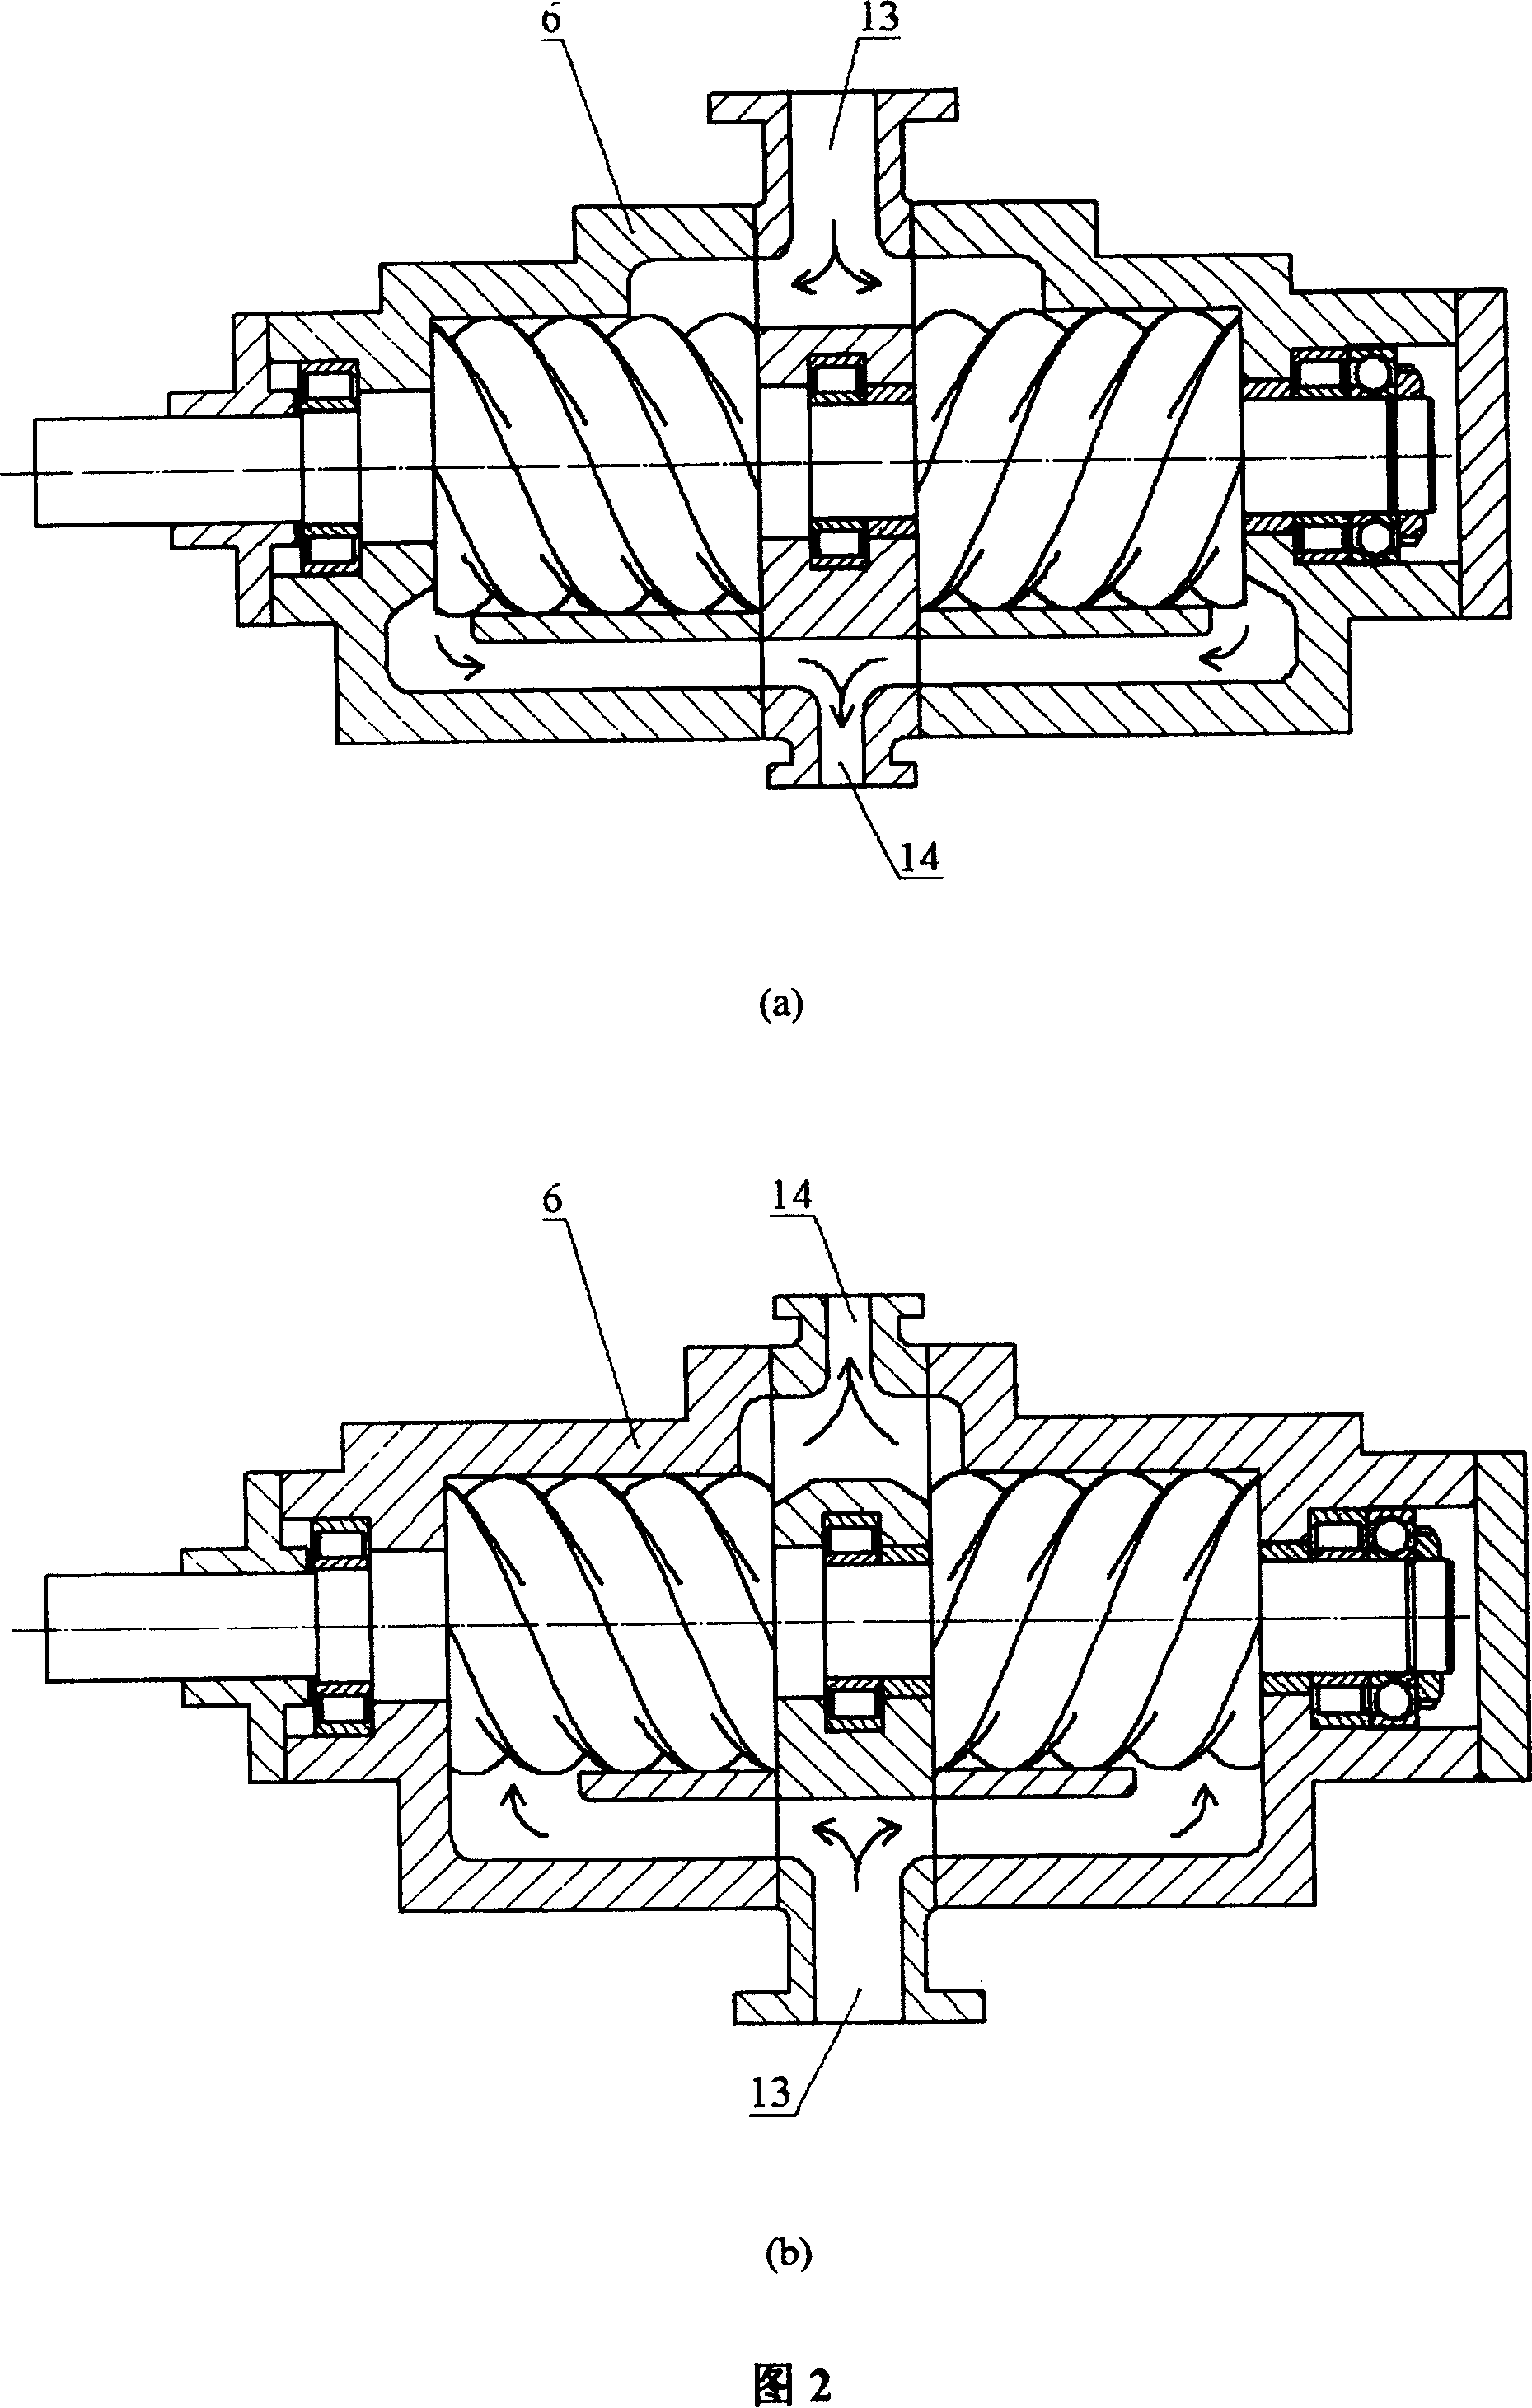 Double-screw compressor for high pressure system